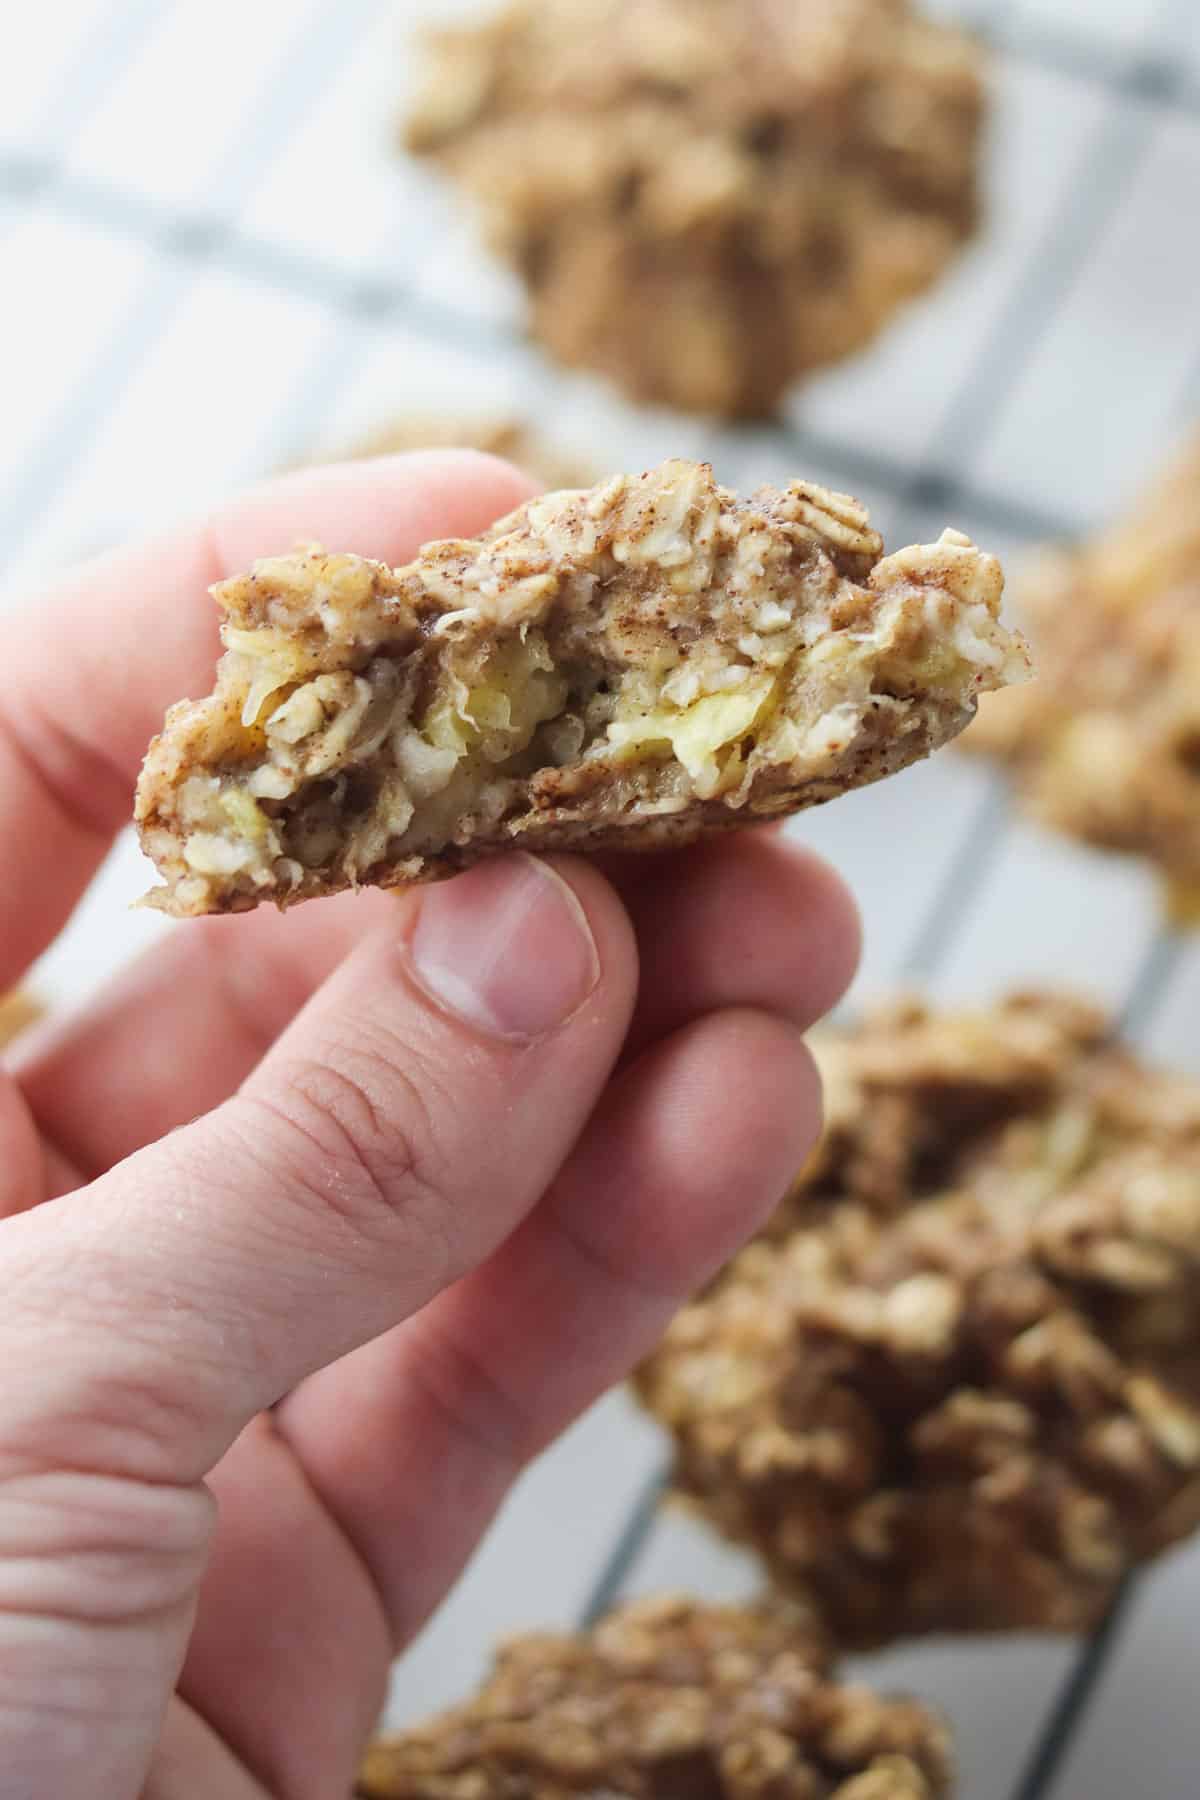 holding a banana oatmeal cookie with a bite taken out of it